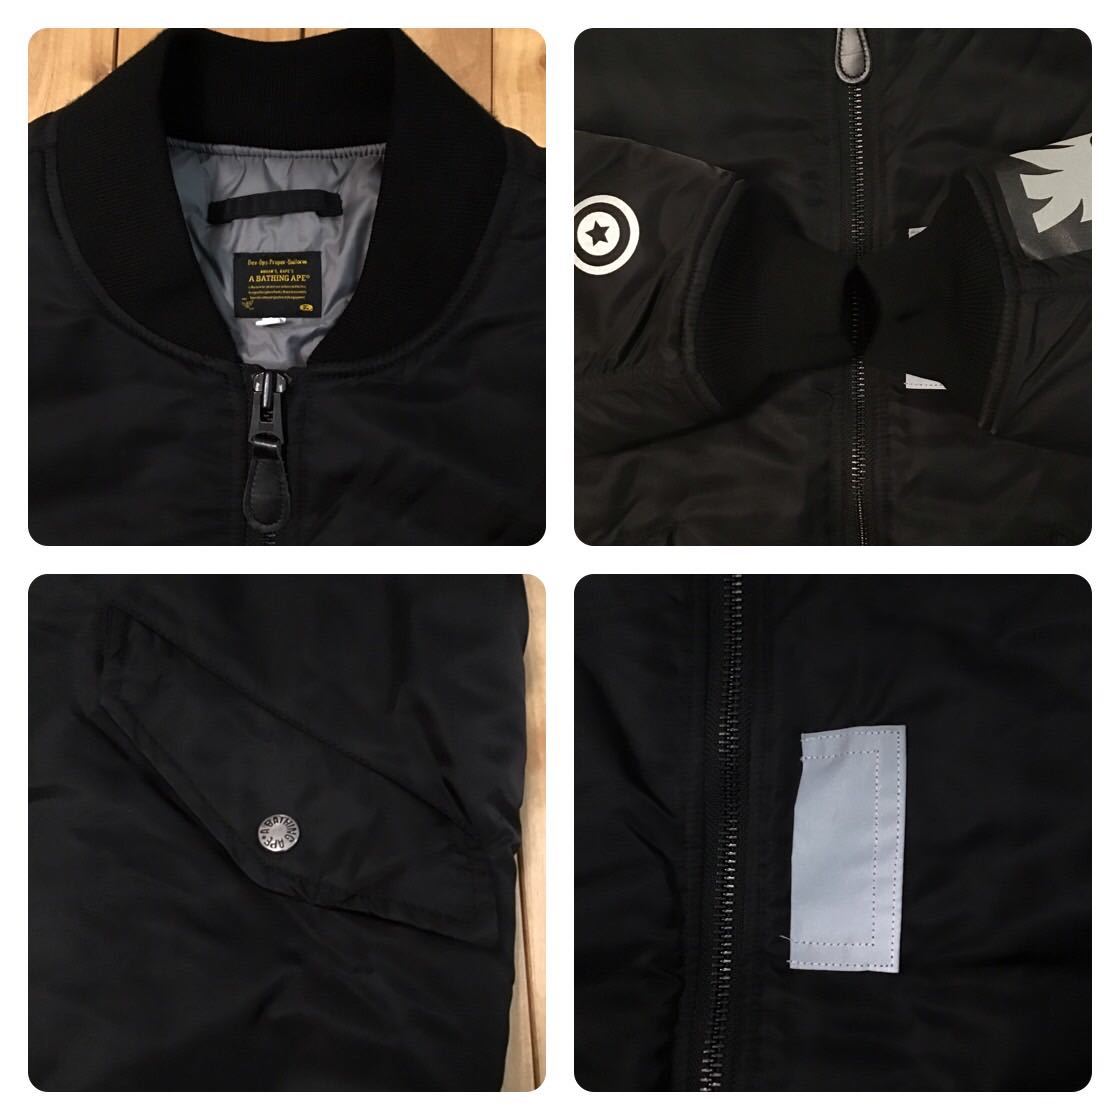 REFLECTOR SHARK MA-1 bomber jacket Mサイズ black a bathing ape BAPE エイプ ベイプ  アベイシングエイプ シャーク ジャケット WGM a54 product details | Yahoo! Auctions Japan proxy  bidding and shopping service | FROM JAPAN